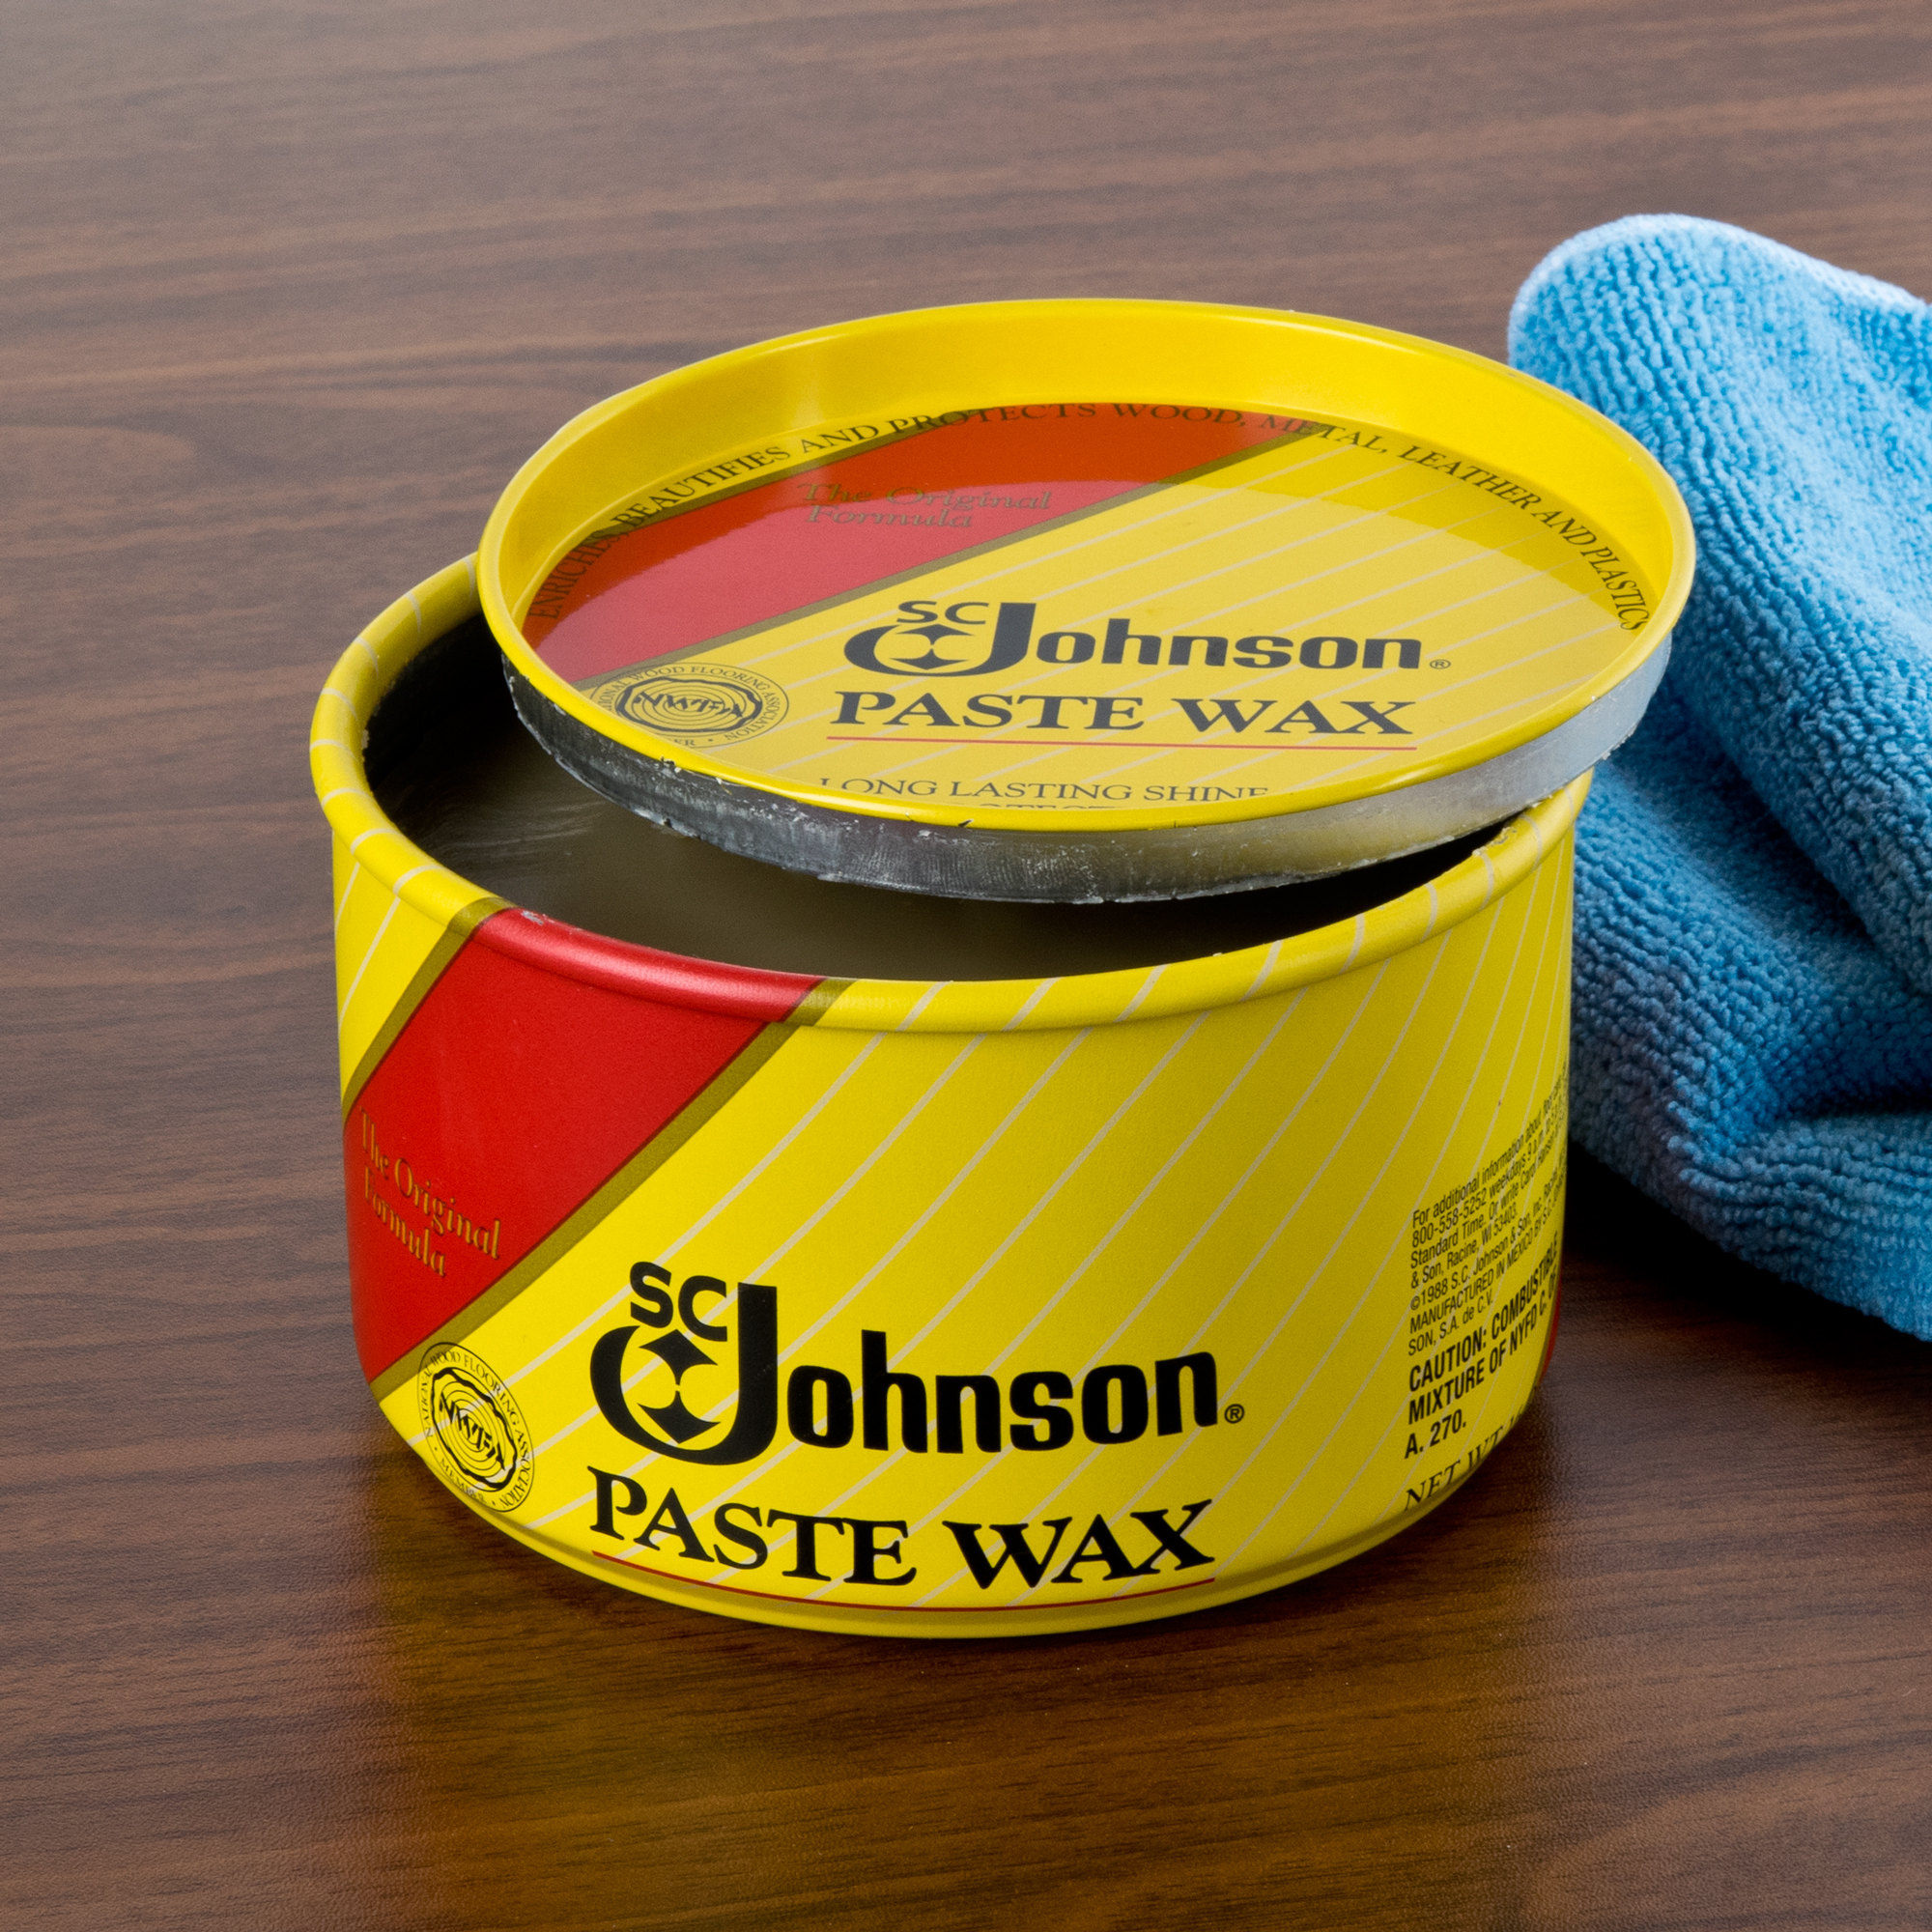 How And When To Use Paste Wax On Wood, Paste Wax For Hardwood Floors